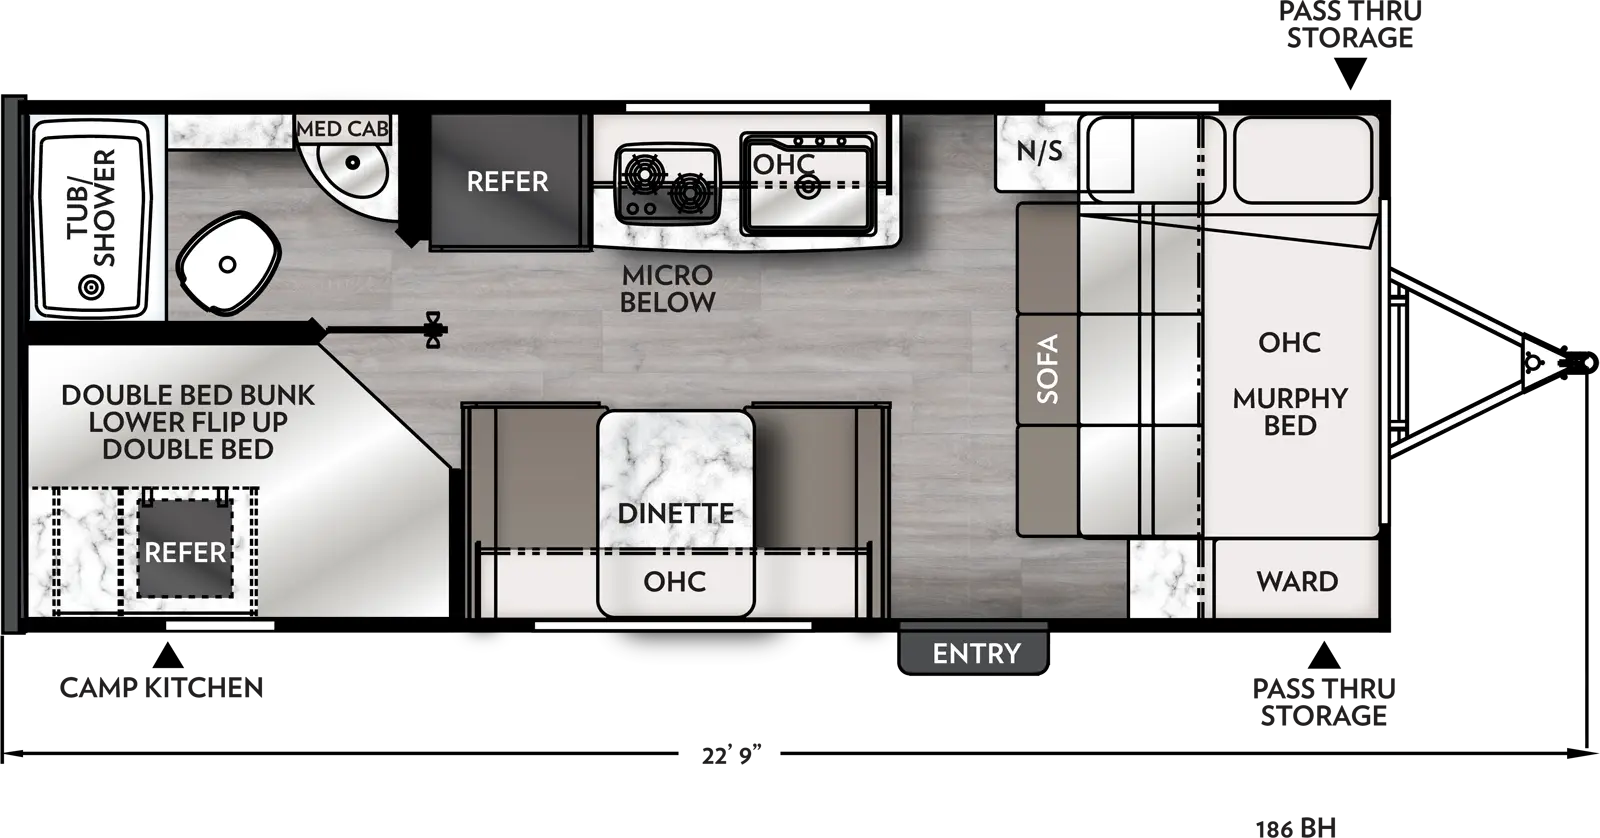 The 186BH has zero slide outs and one entry door on the door side. Interior layout from front to back: front murphy bed and sofa with wardrobe, overhead storage and night stand; off-door side kitchen containing sink, cook top stove, overhead cabinet, microwave below, and refrigerator; door side booth dinette with overhead cabinets; rear bathroom with tub/shower, toilet and medicine cabinet on off-door side; Double bed bunk with lower flip up double bed located on the door side; exterior rear camp kitchen with refrigerator.